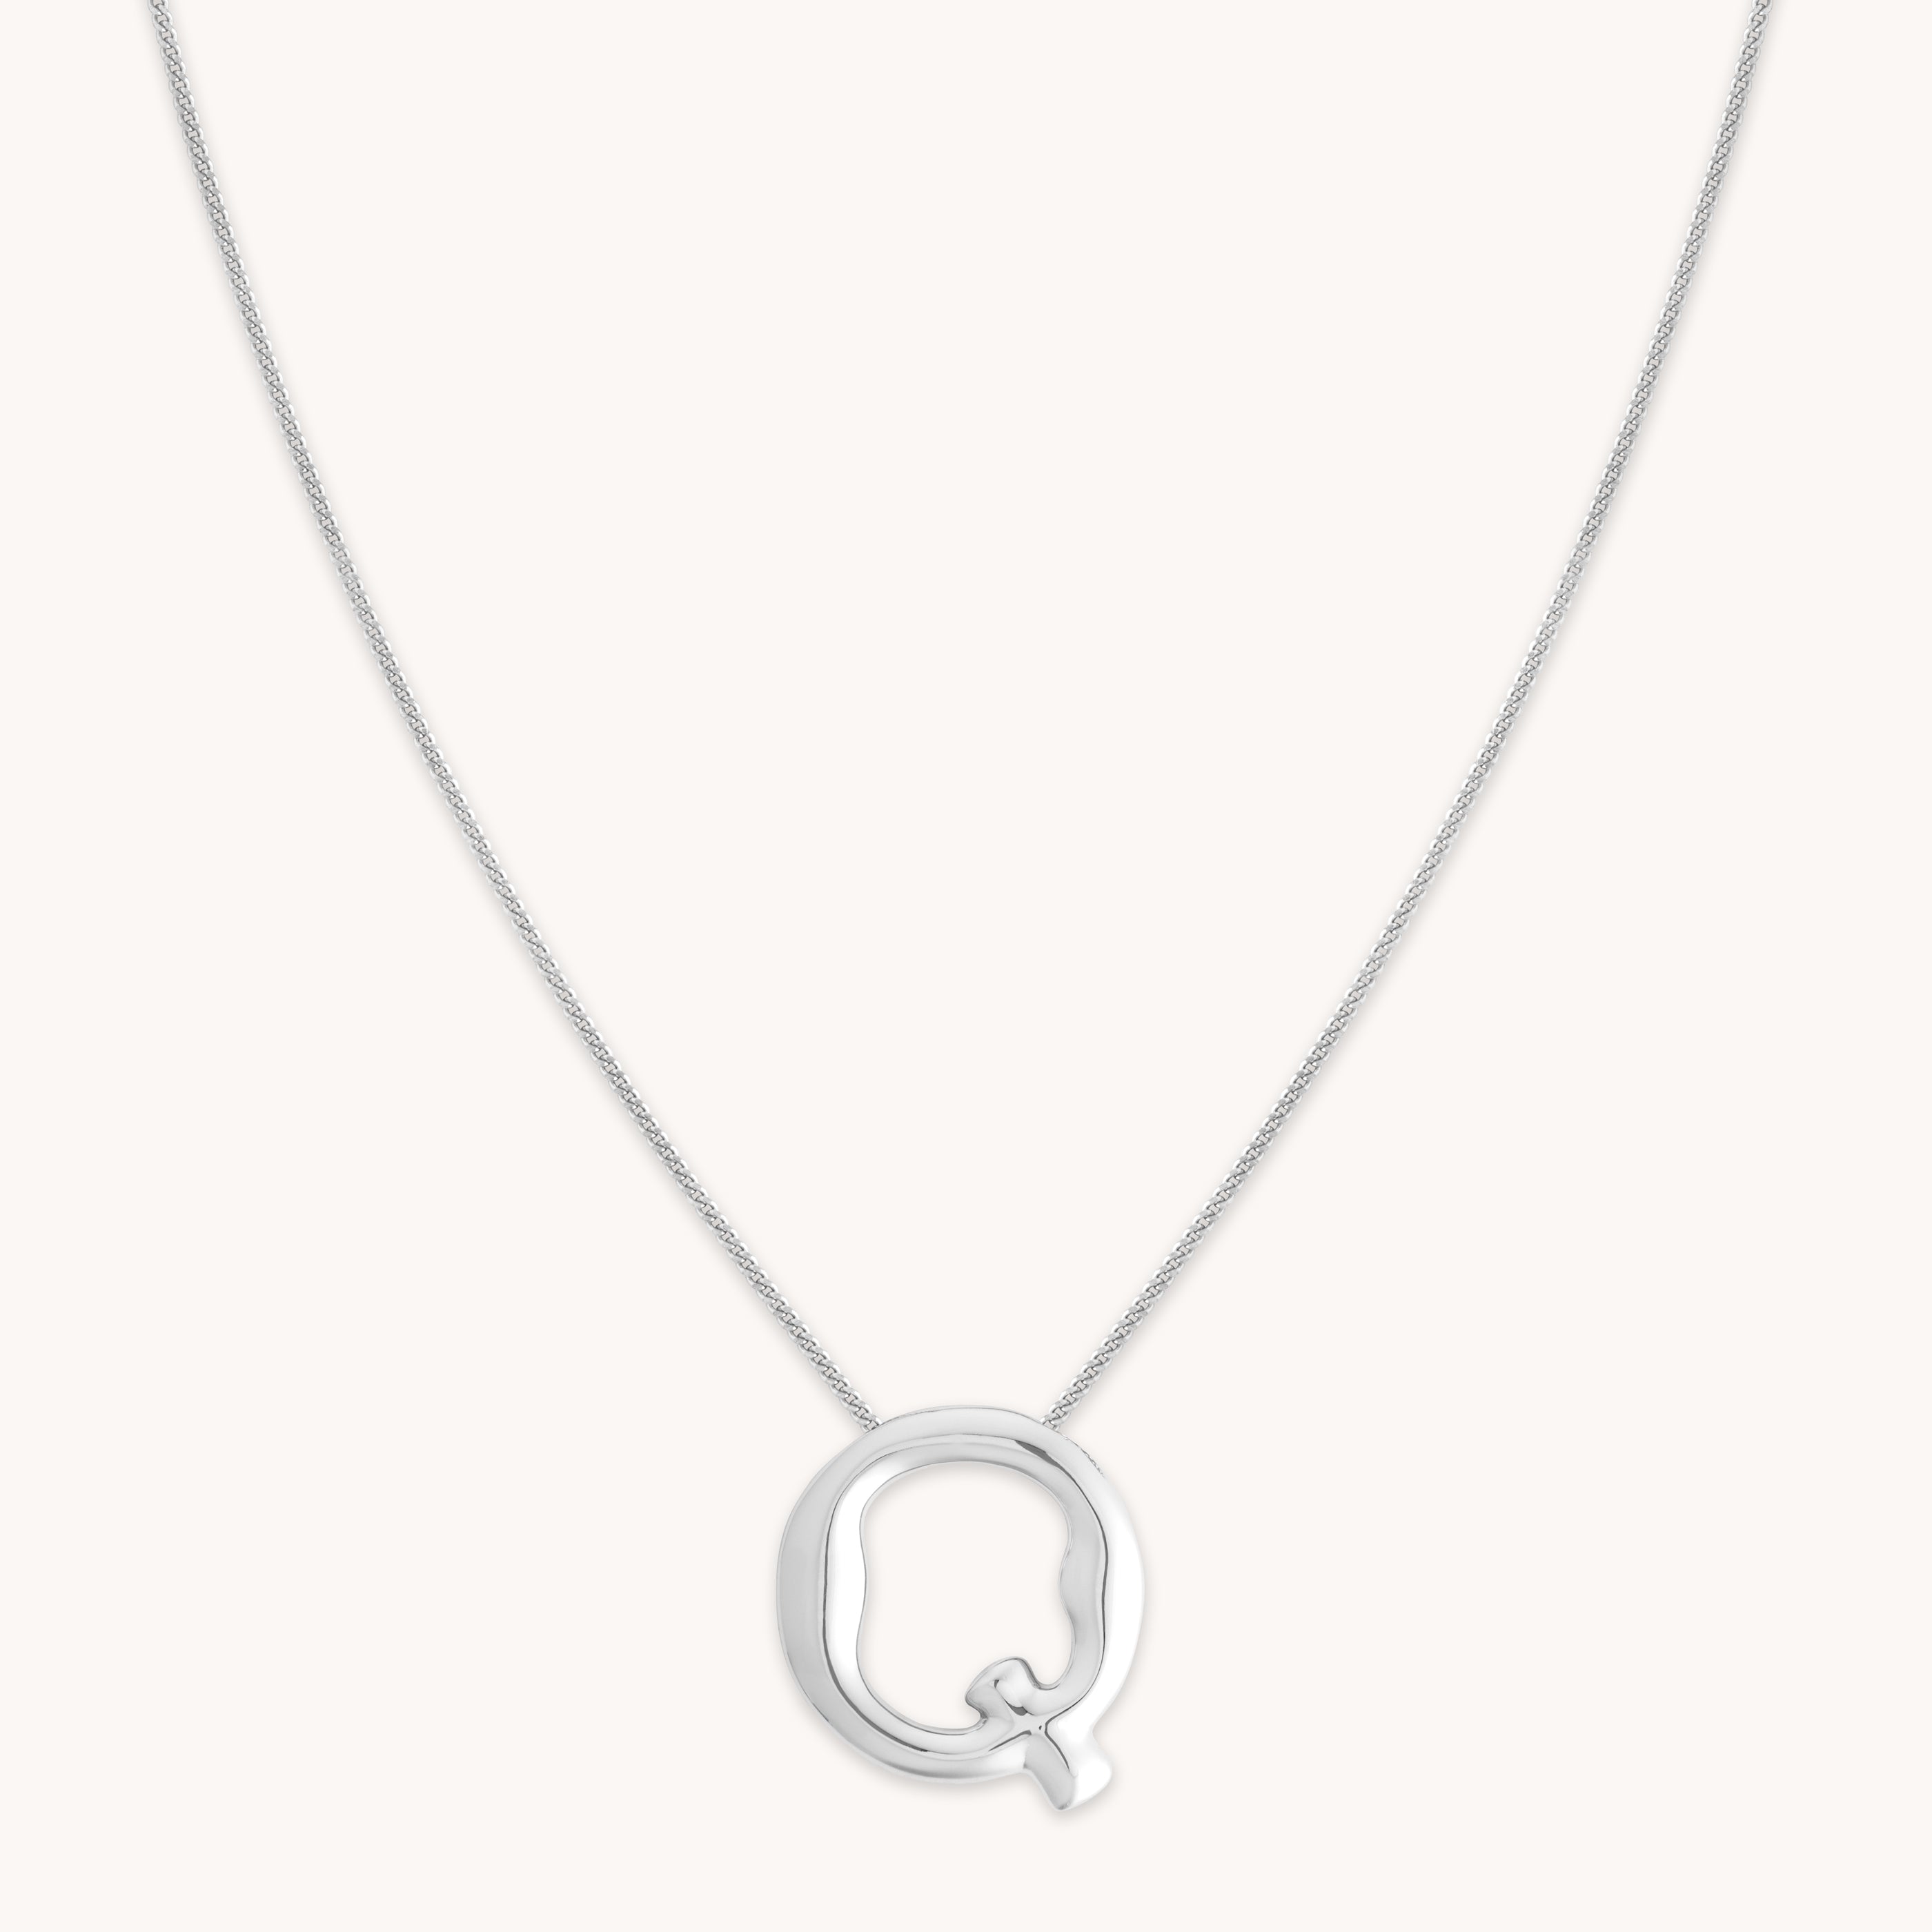 Q Initial Bold Pendant Necklace in Silver